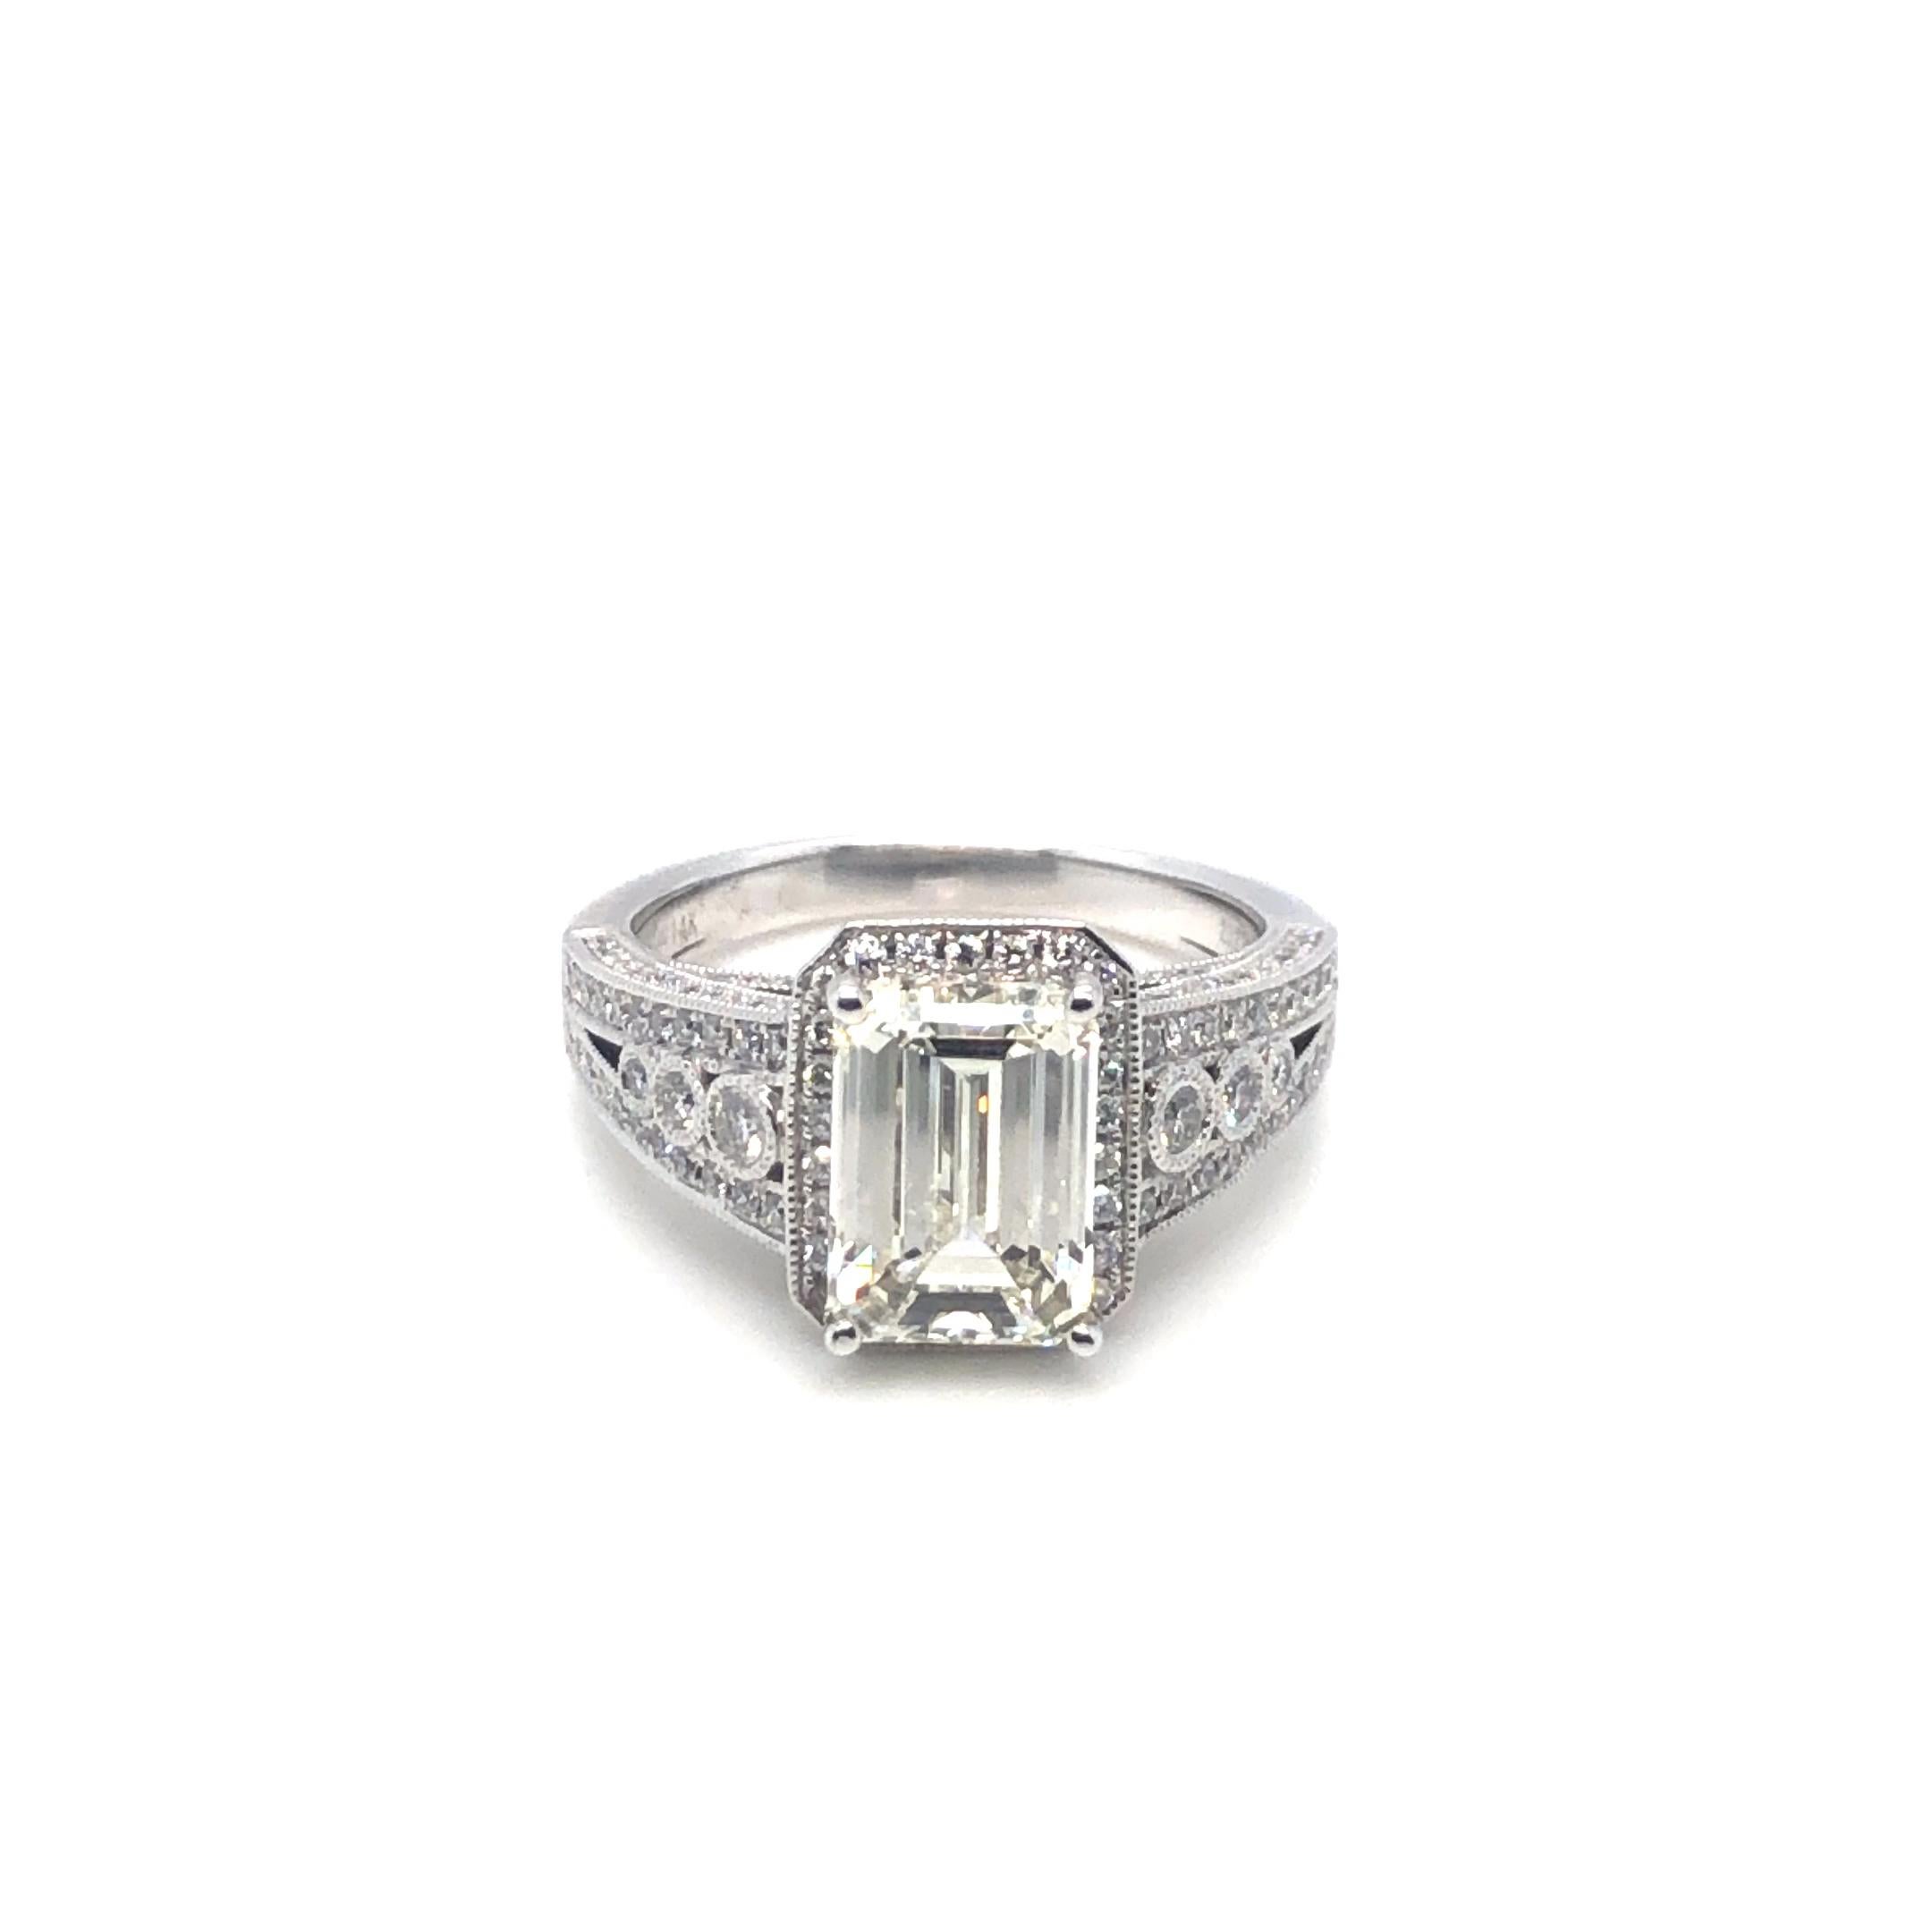 Emerald Cut 3.01ct Diamond Engagement Ring in 14K White Gold. The ring features a 3.01 carat emerald cut diamond, L color, SI2 clarity, GIA certified. The ring is accented by 0.88ctw of round diamonds. Size 7.5